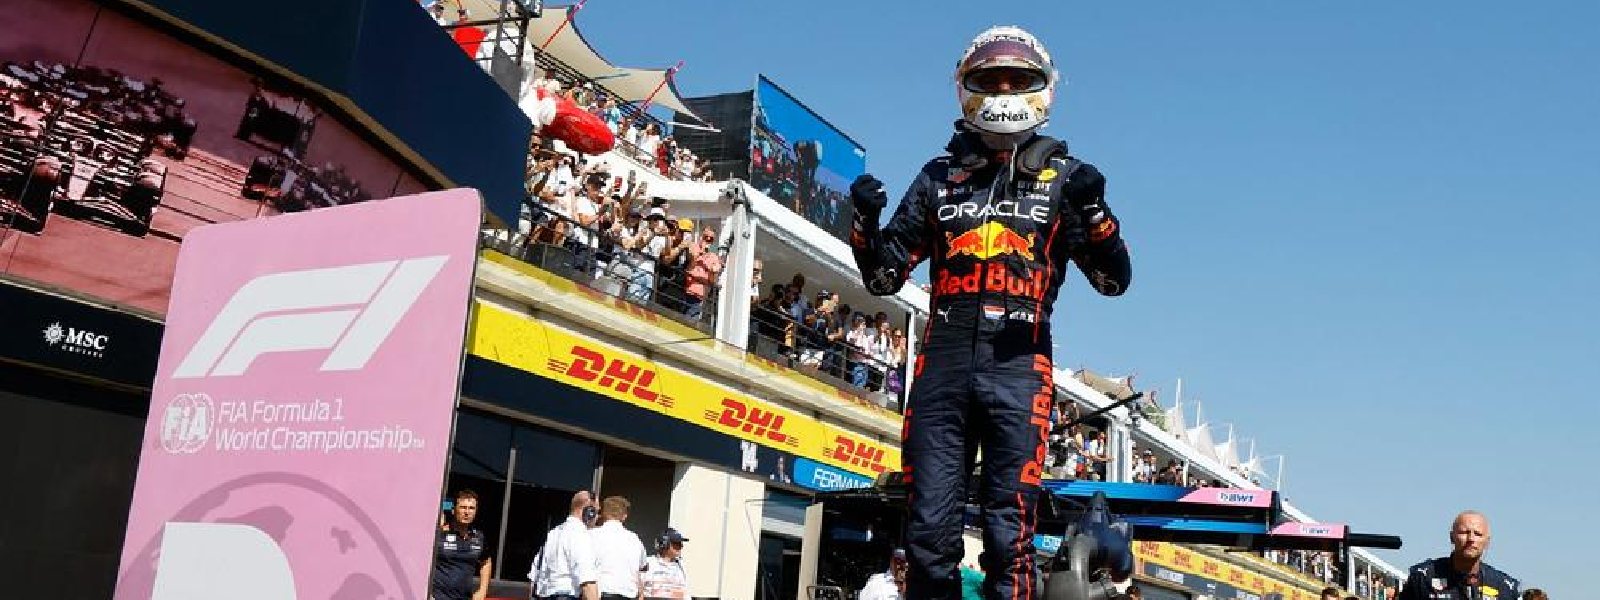 F1: Verstappen wins French Grand Prix after Leclerc crashes out